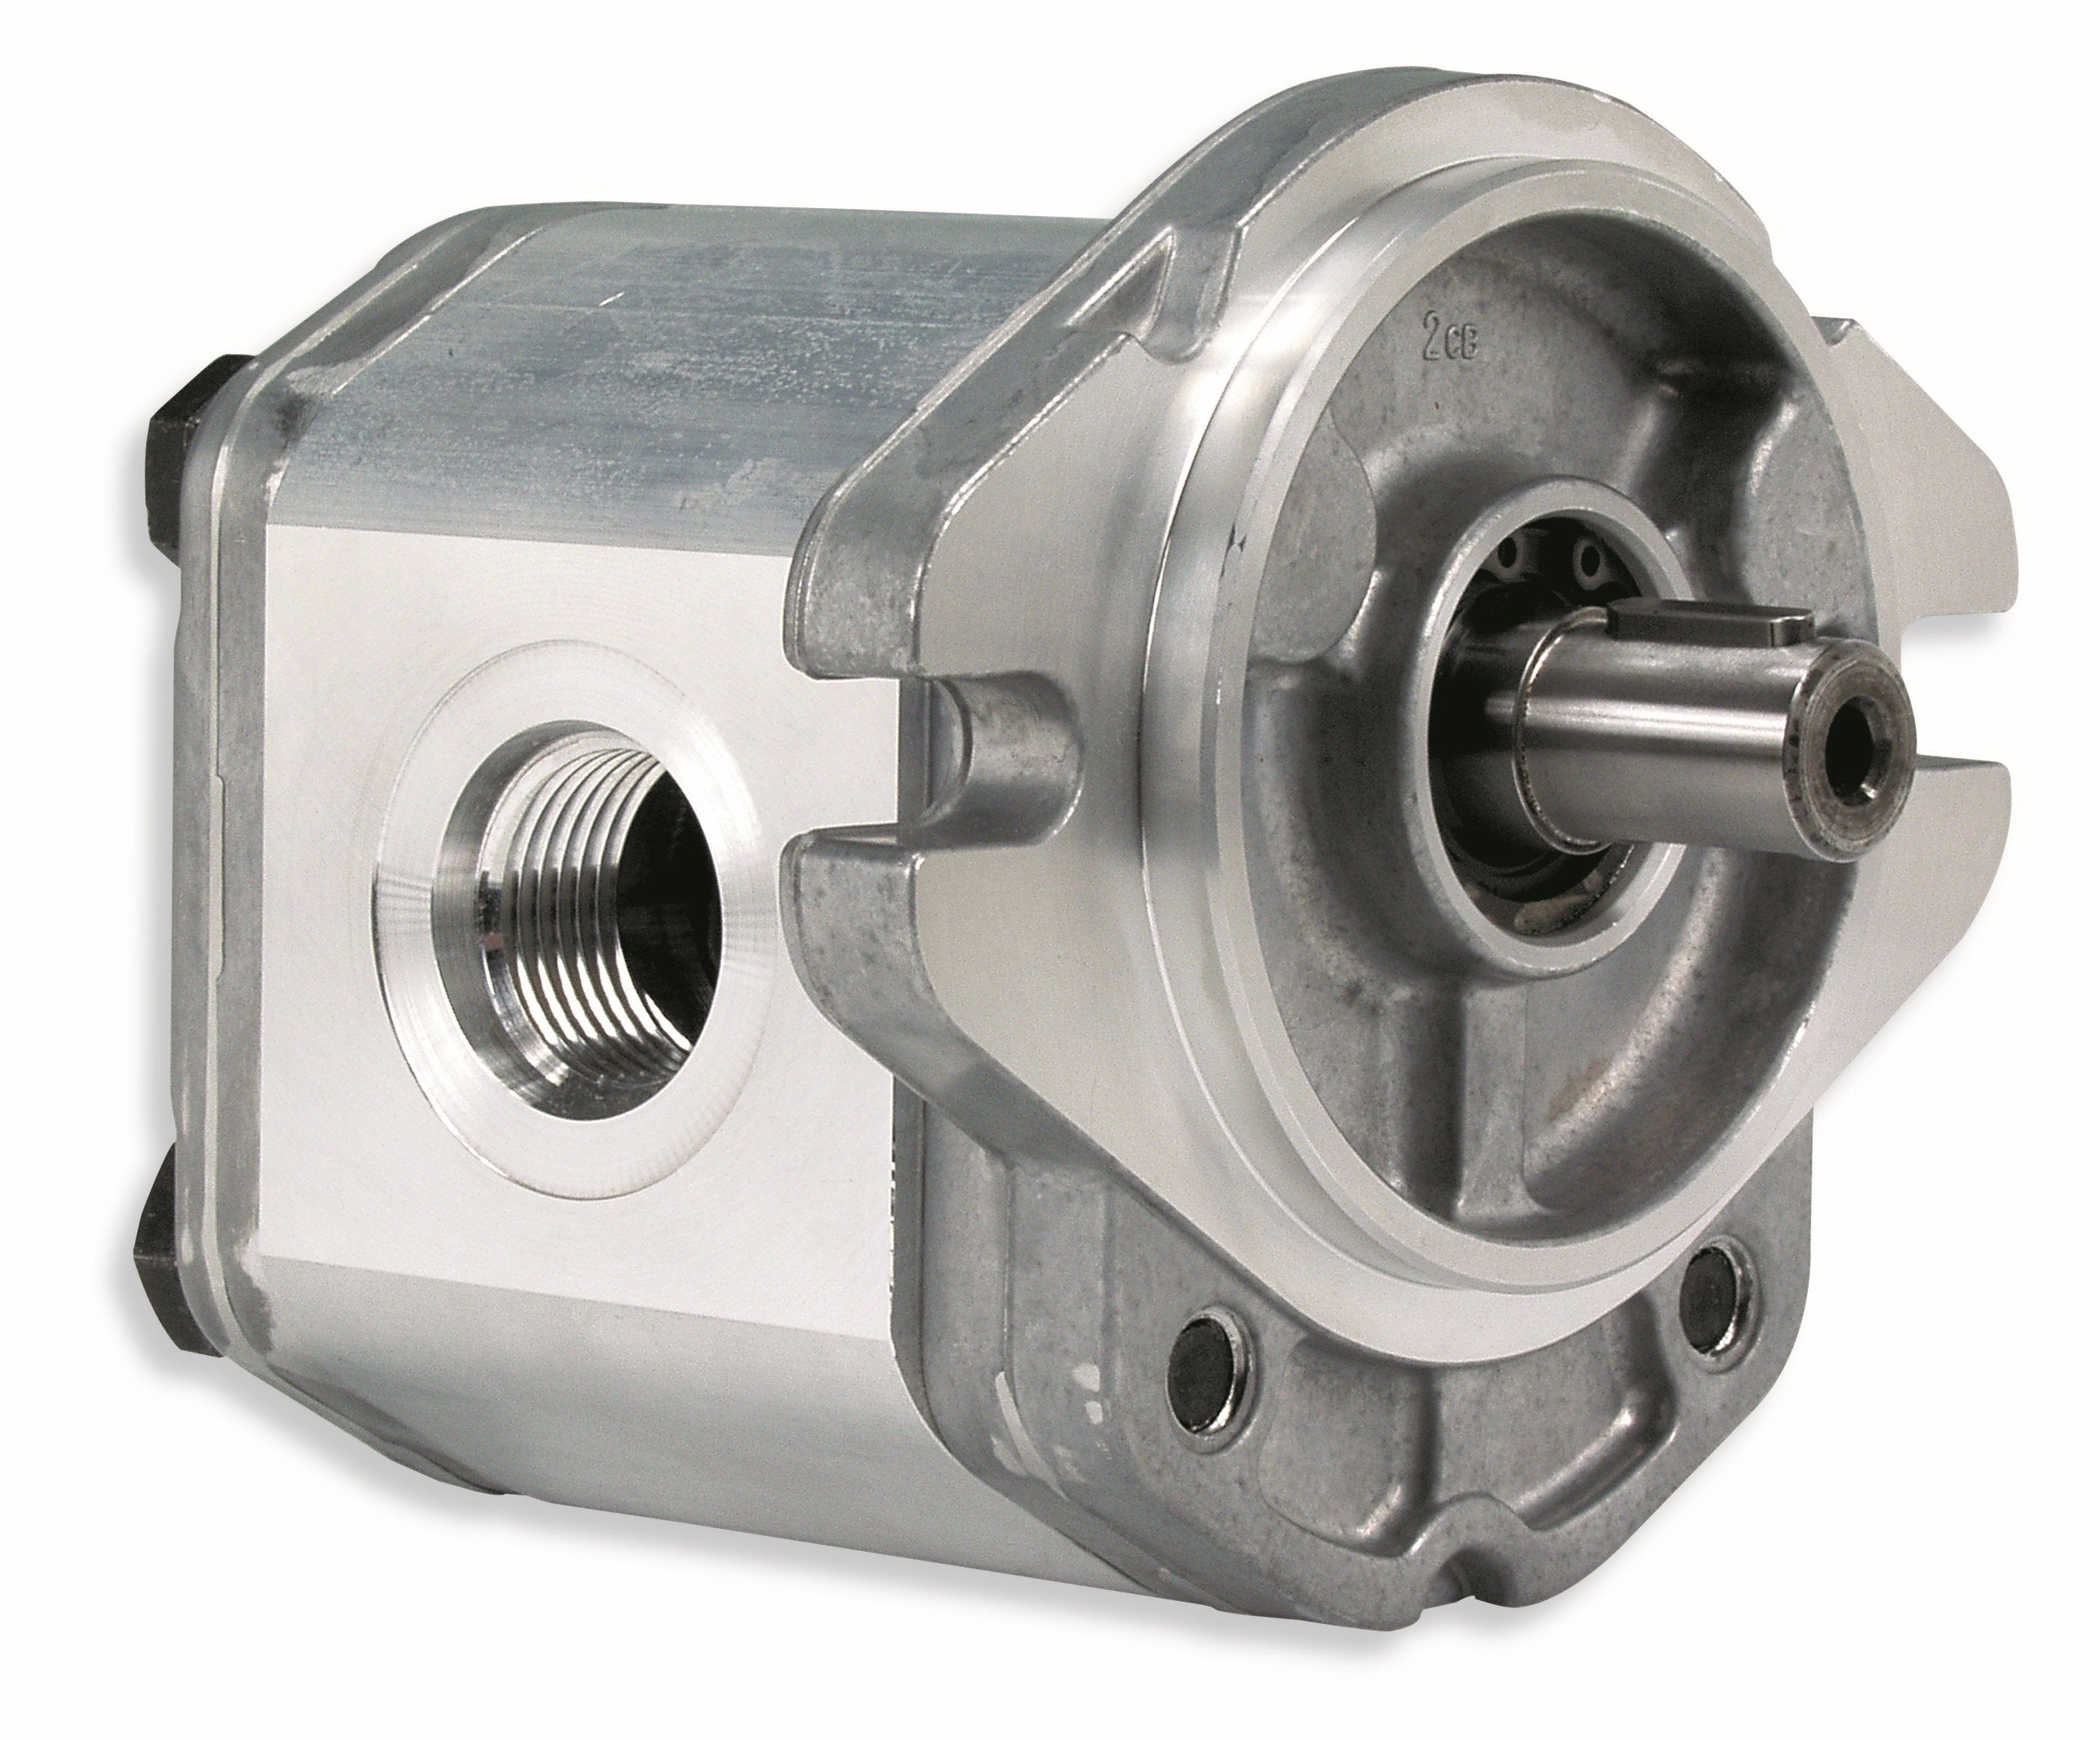 GHM3A-R-120-E4 : Marzocchi Gear Motor, Bidirectional, 78cc, 2610psi rated, 2300RPM, 1.25" Code 61 ports, 7/8" Bore x 1/4" Keyed Shaft